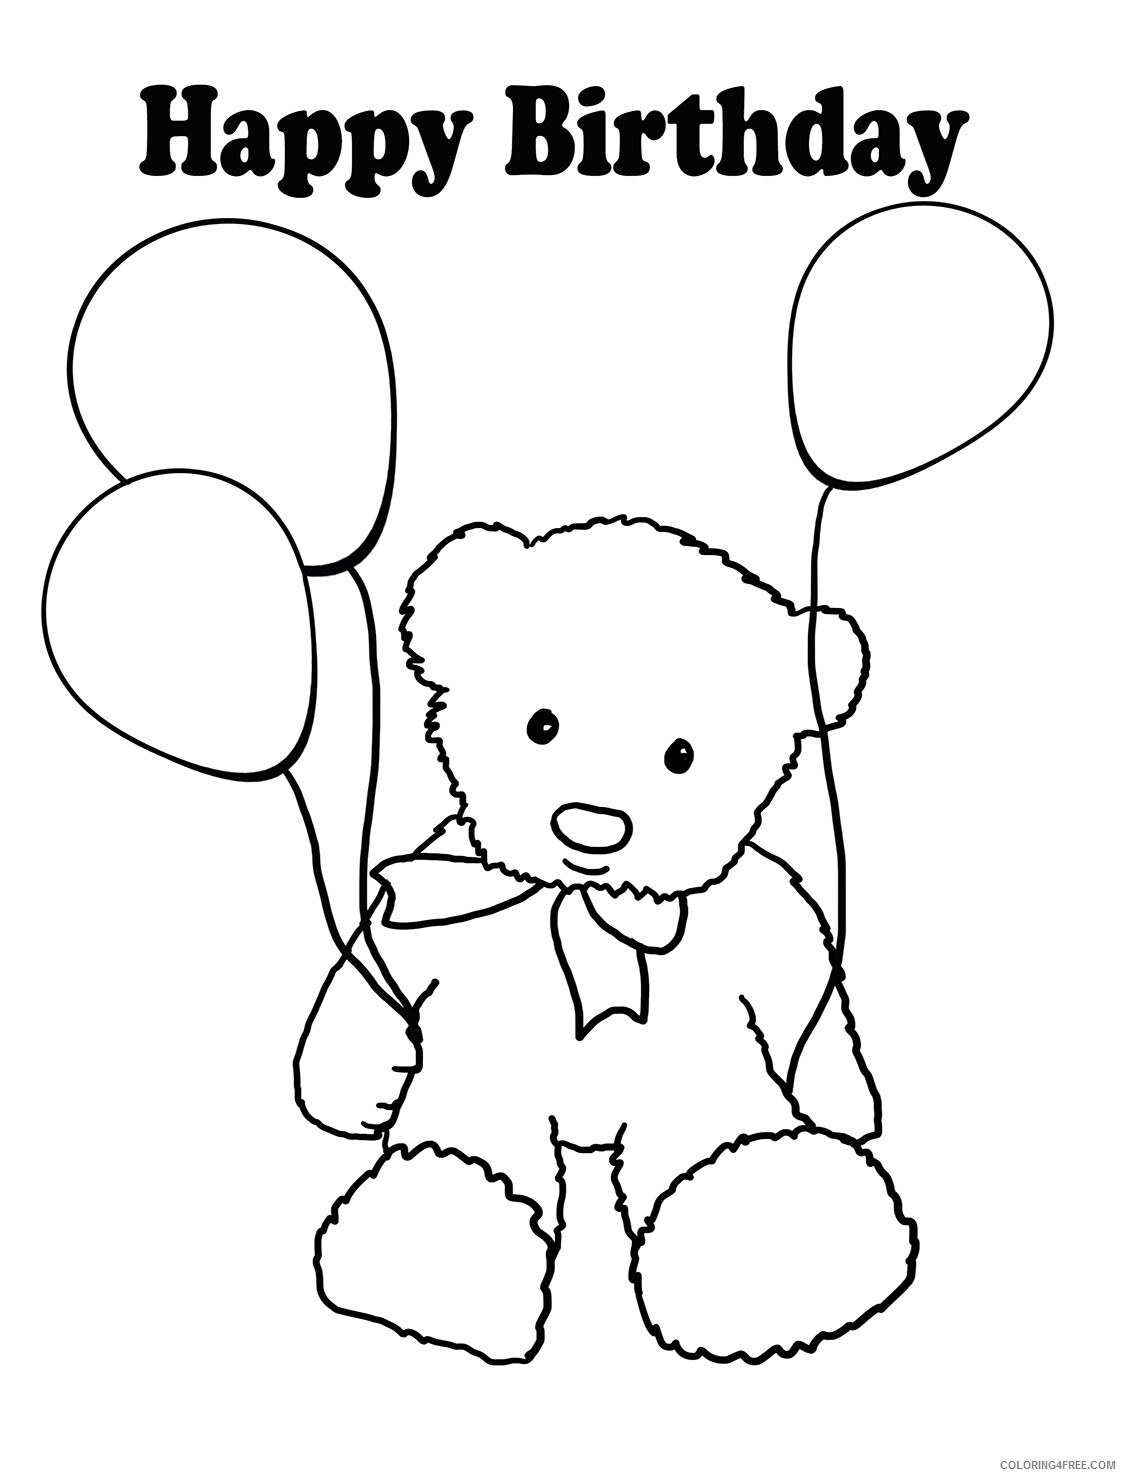 Happy Birthday Coloring Pages Holiday Happy Birthday Balloon Printable 2021 0704 Coloring4free